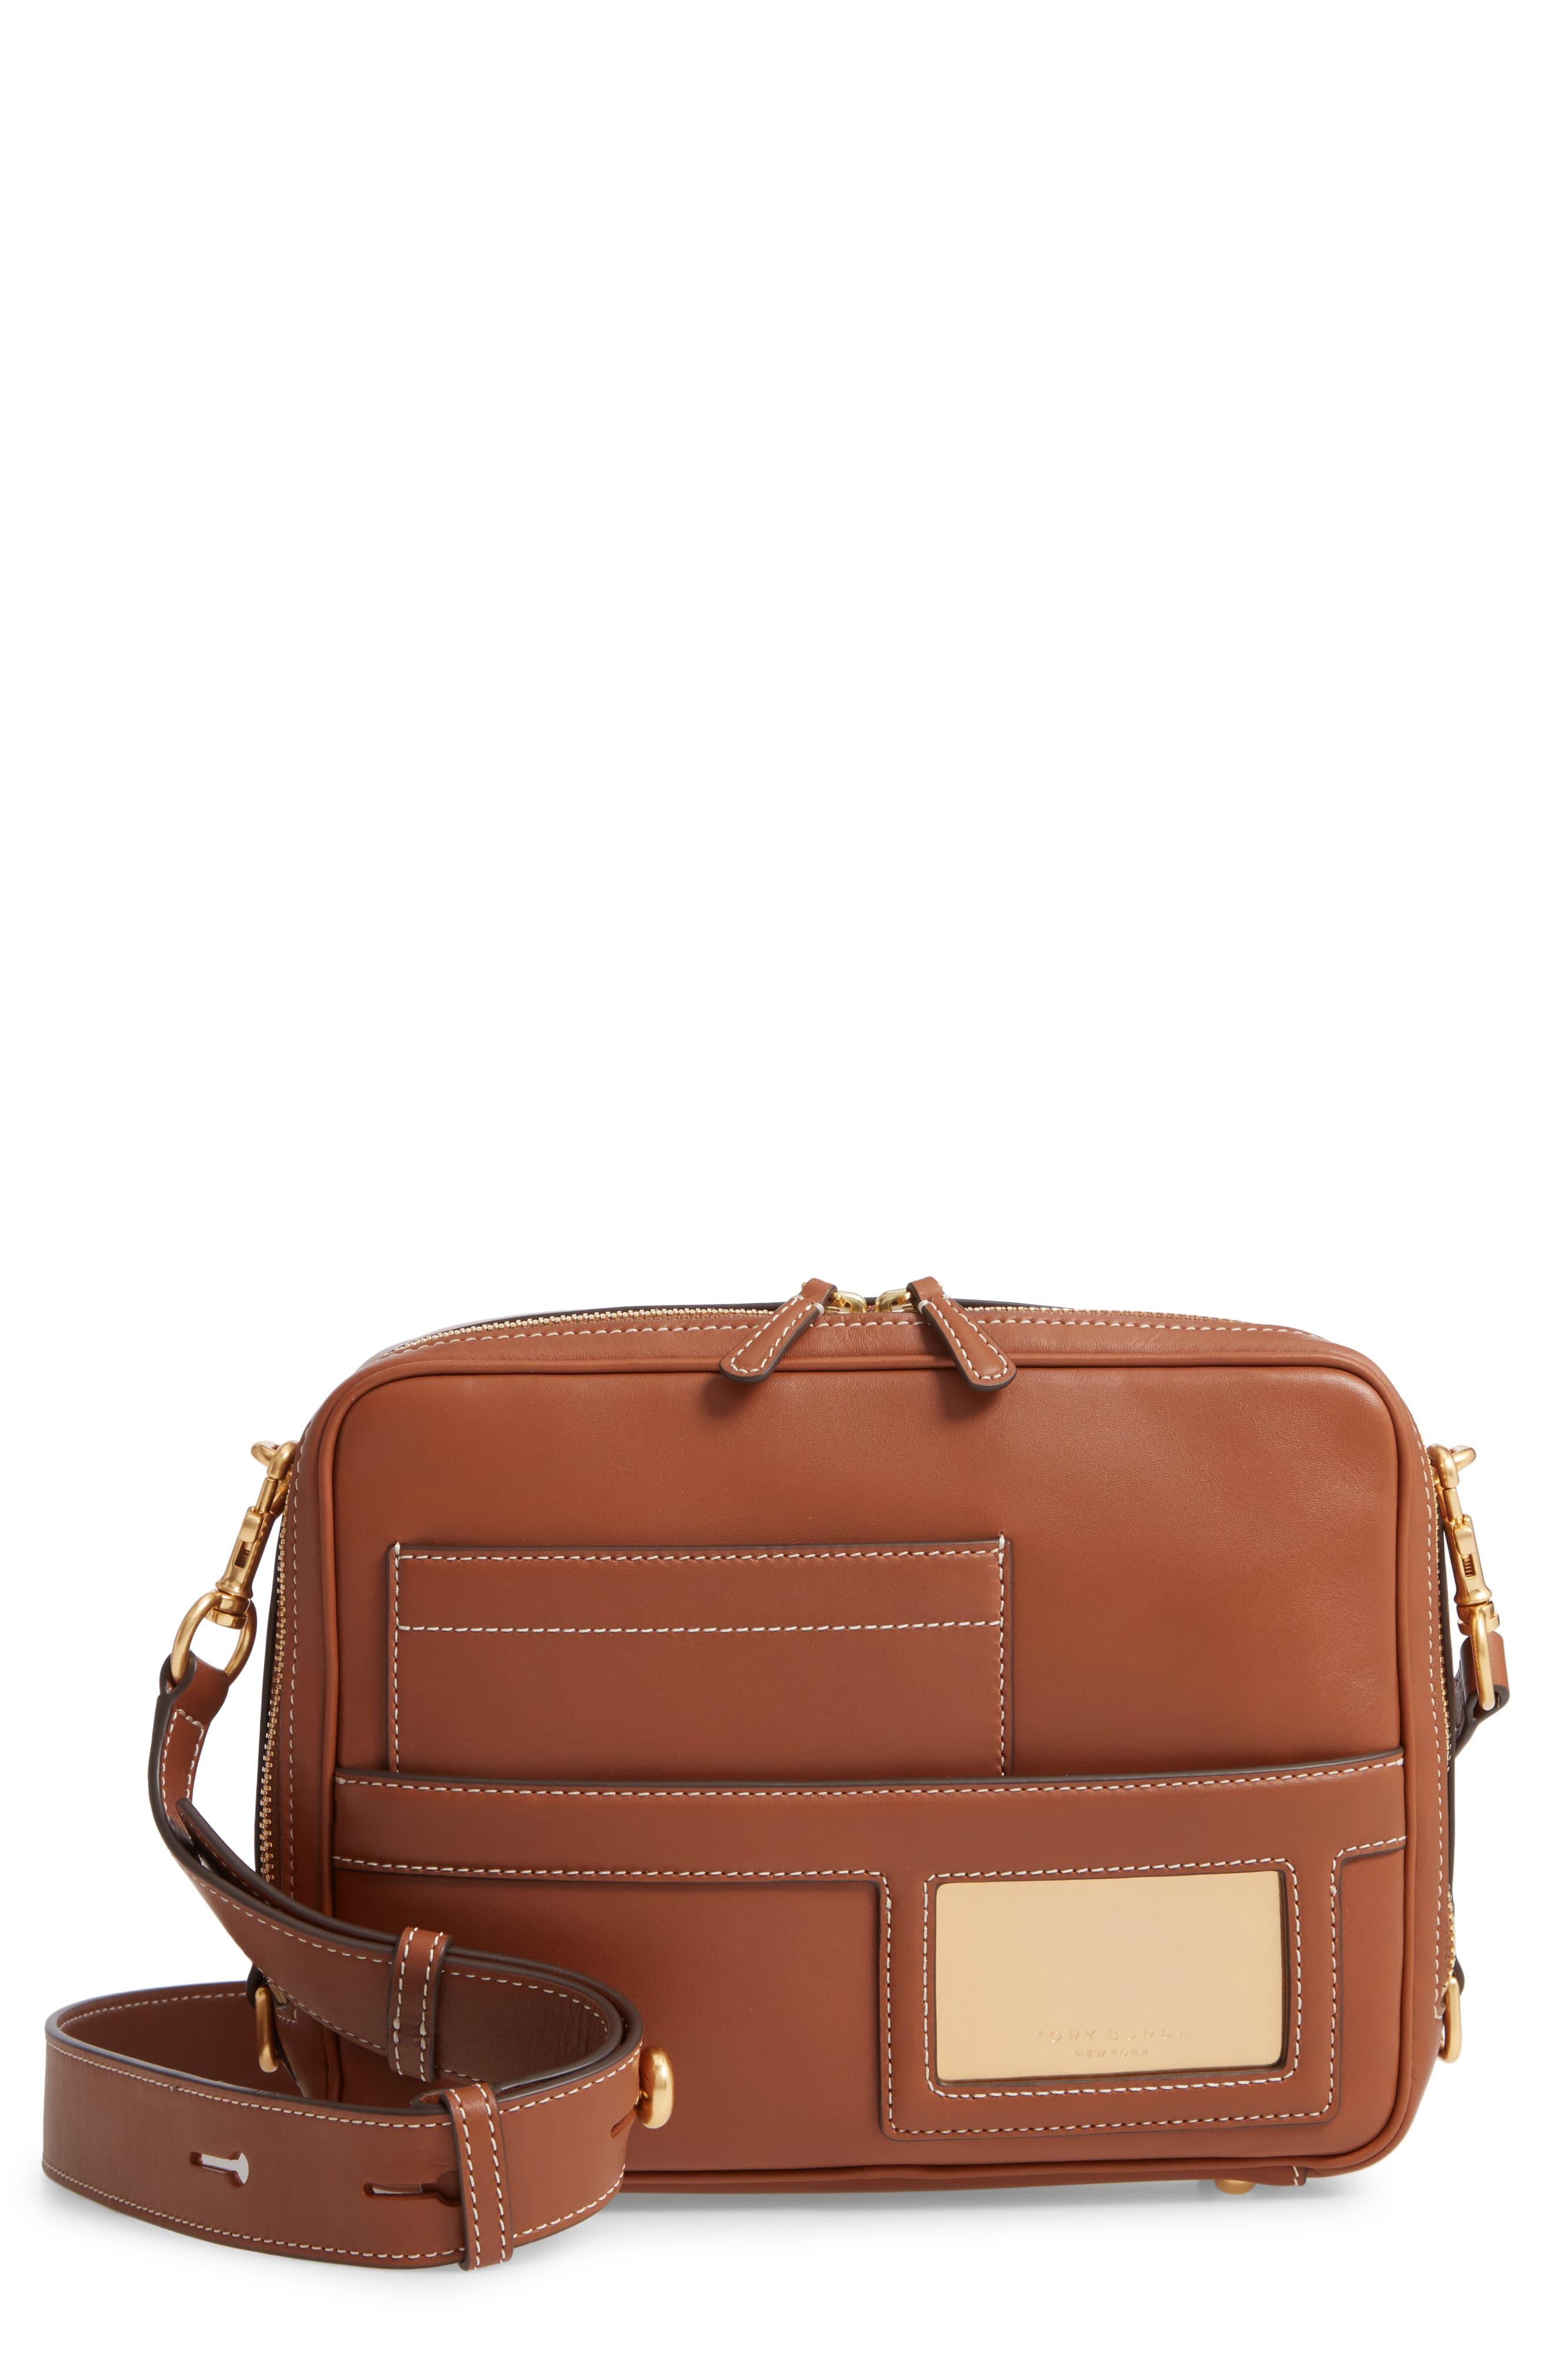 Tory Burch Leather Camera Bag in Brown - Lyst